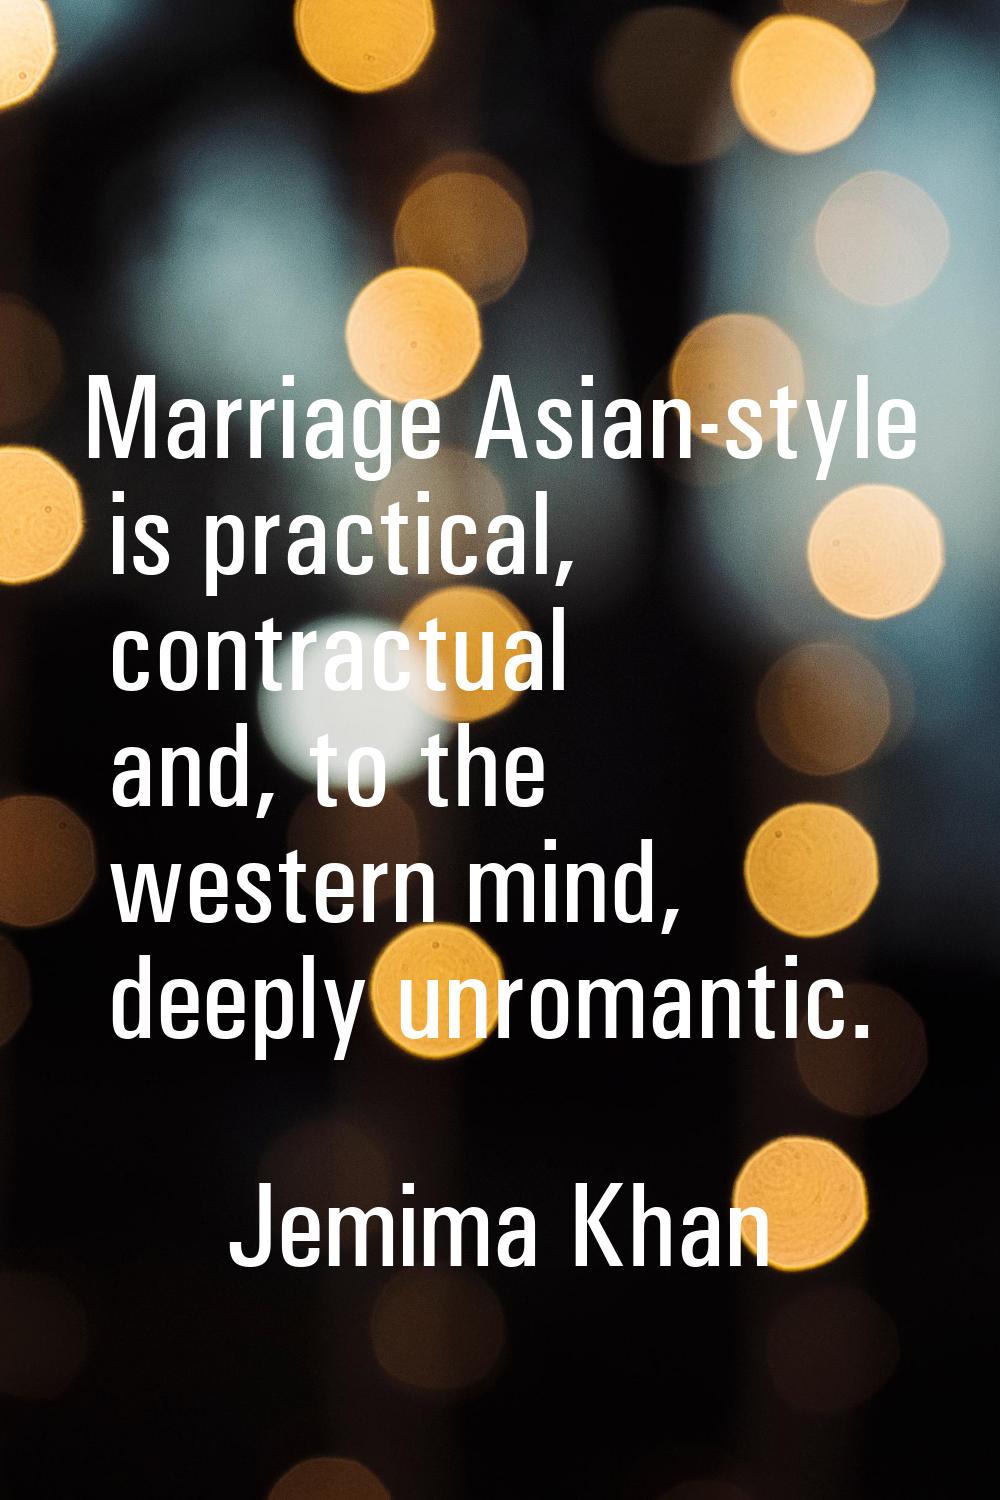 Marriage Asian-style is practical, contractual and, to the western mind, deeply unromantic.